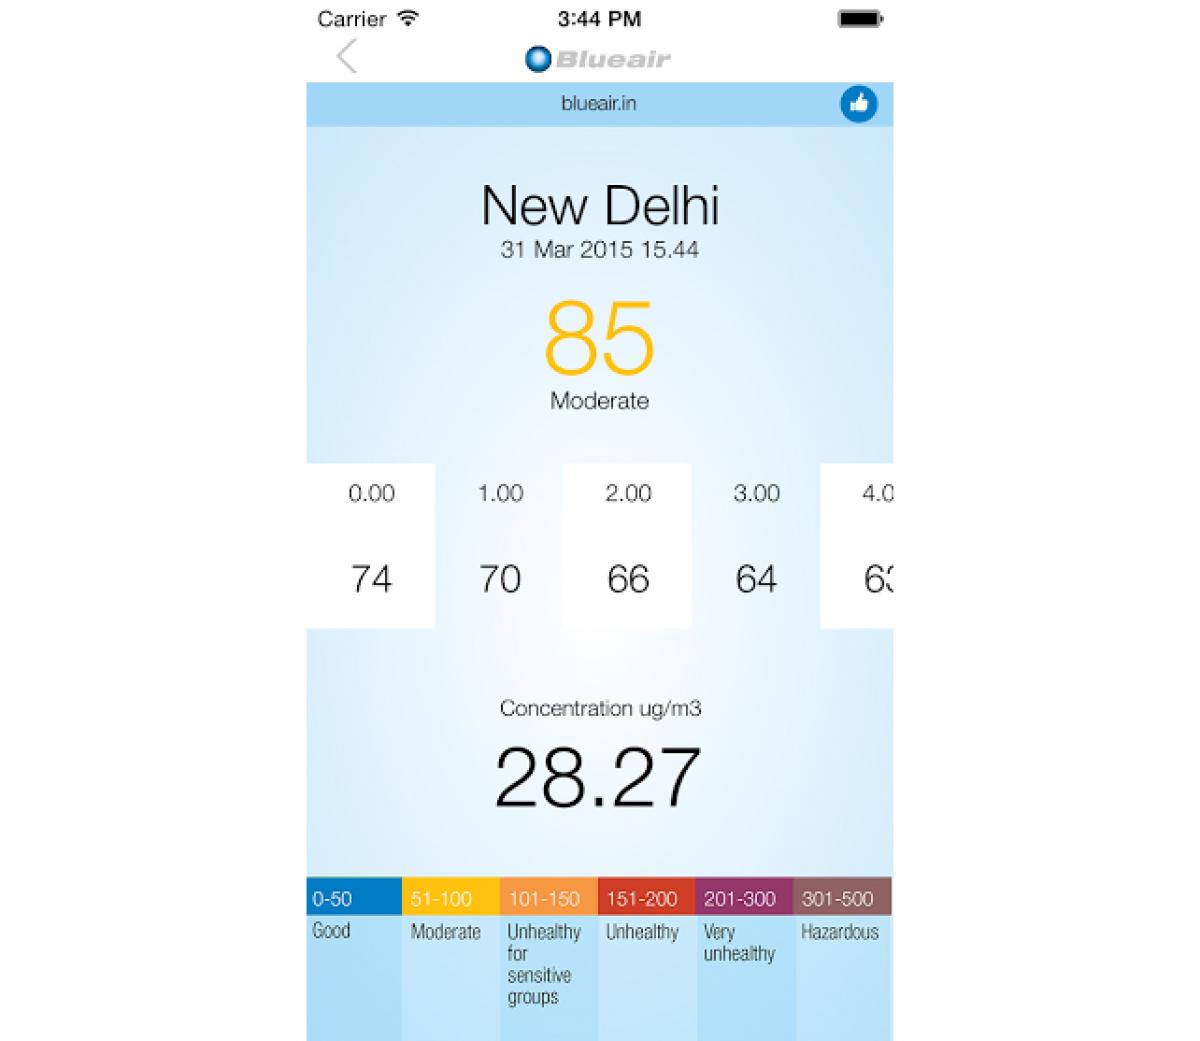 Blueair Launches Air Pollution Warning App on Android